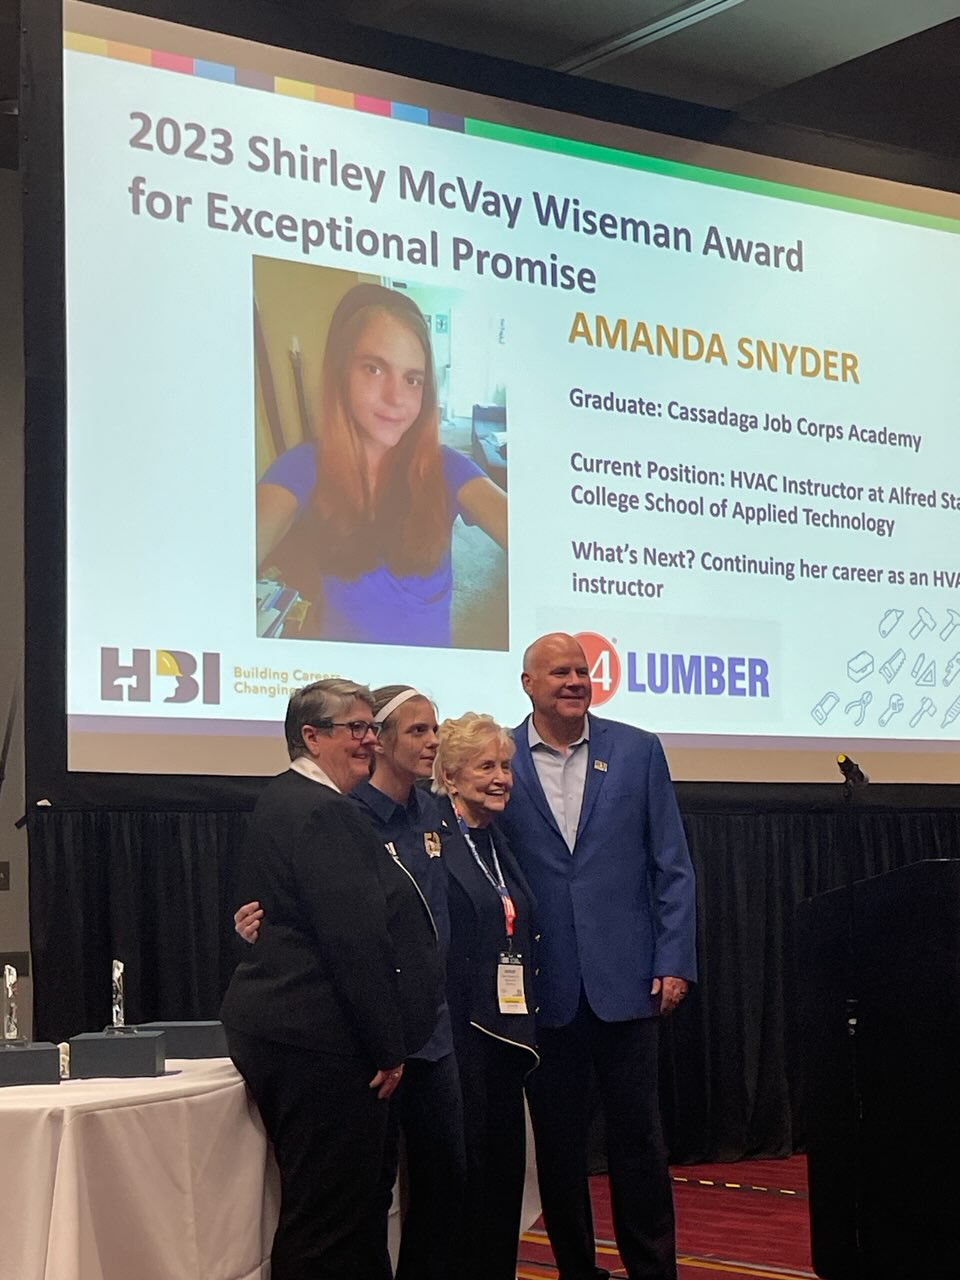 Amanda Snyder receives her award at the National Association of Home Builders Annual Conference